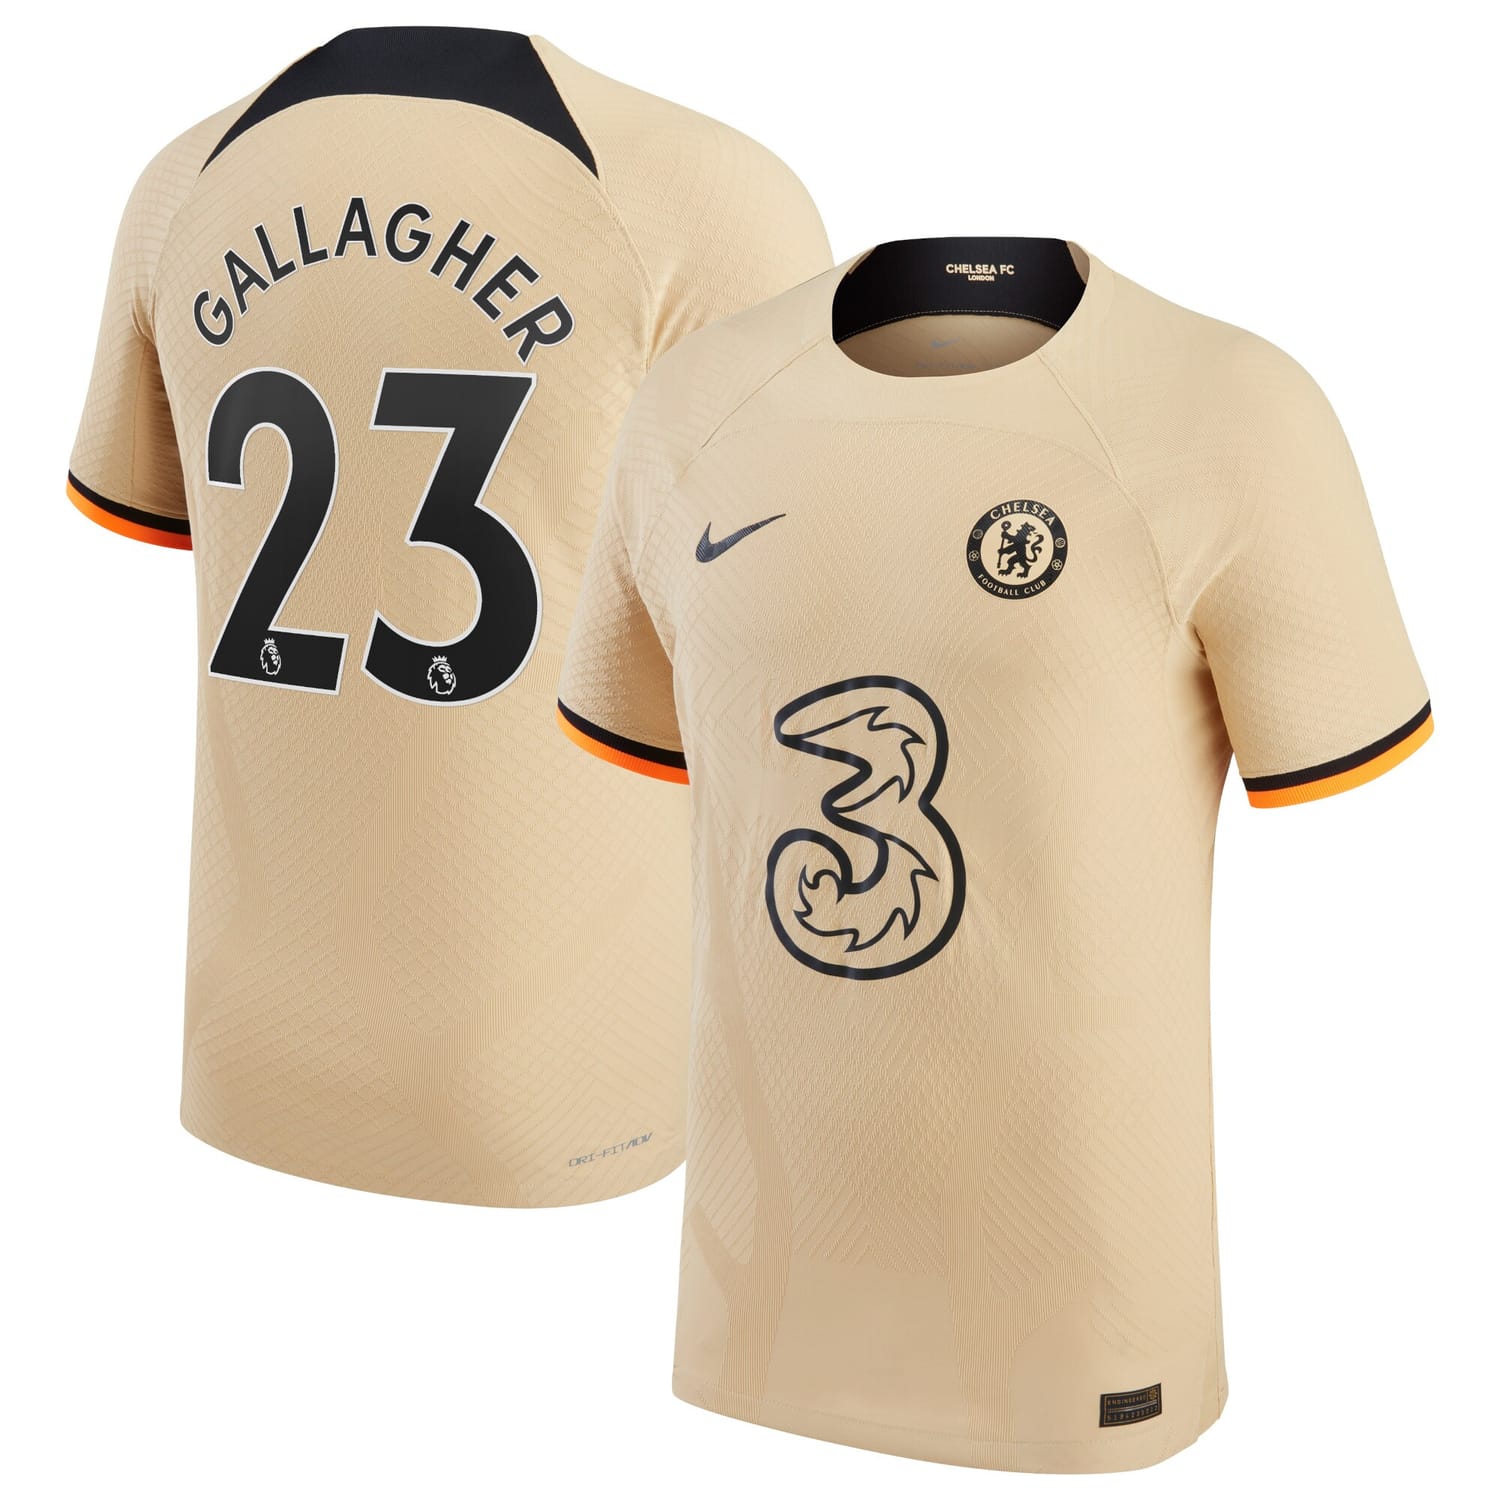 Premier League Chelsea Third Authentic Jersey Shirt 2022-23 player Conor Gallagher 23 printing for Men